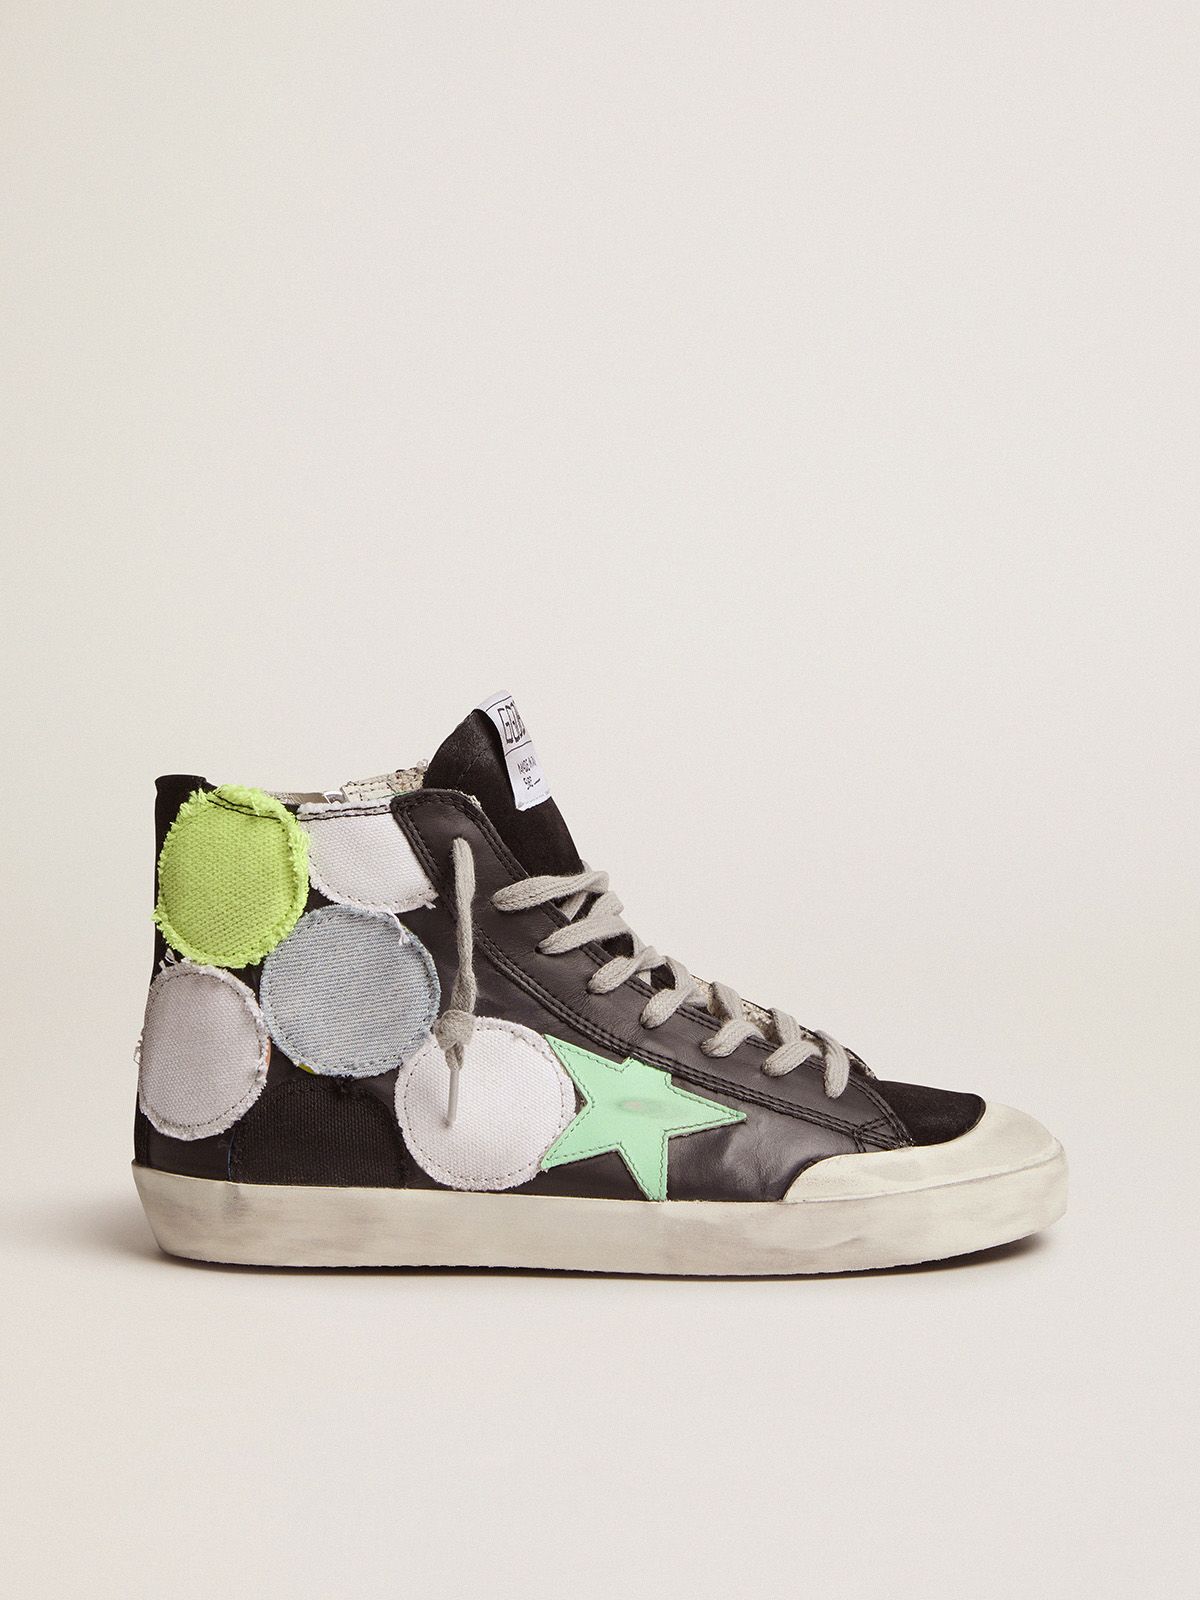 golden goose coloured Penstar Dream Maker polka-dot Collection Francy patches sneakers with